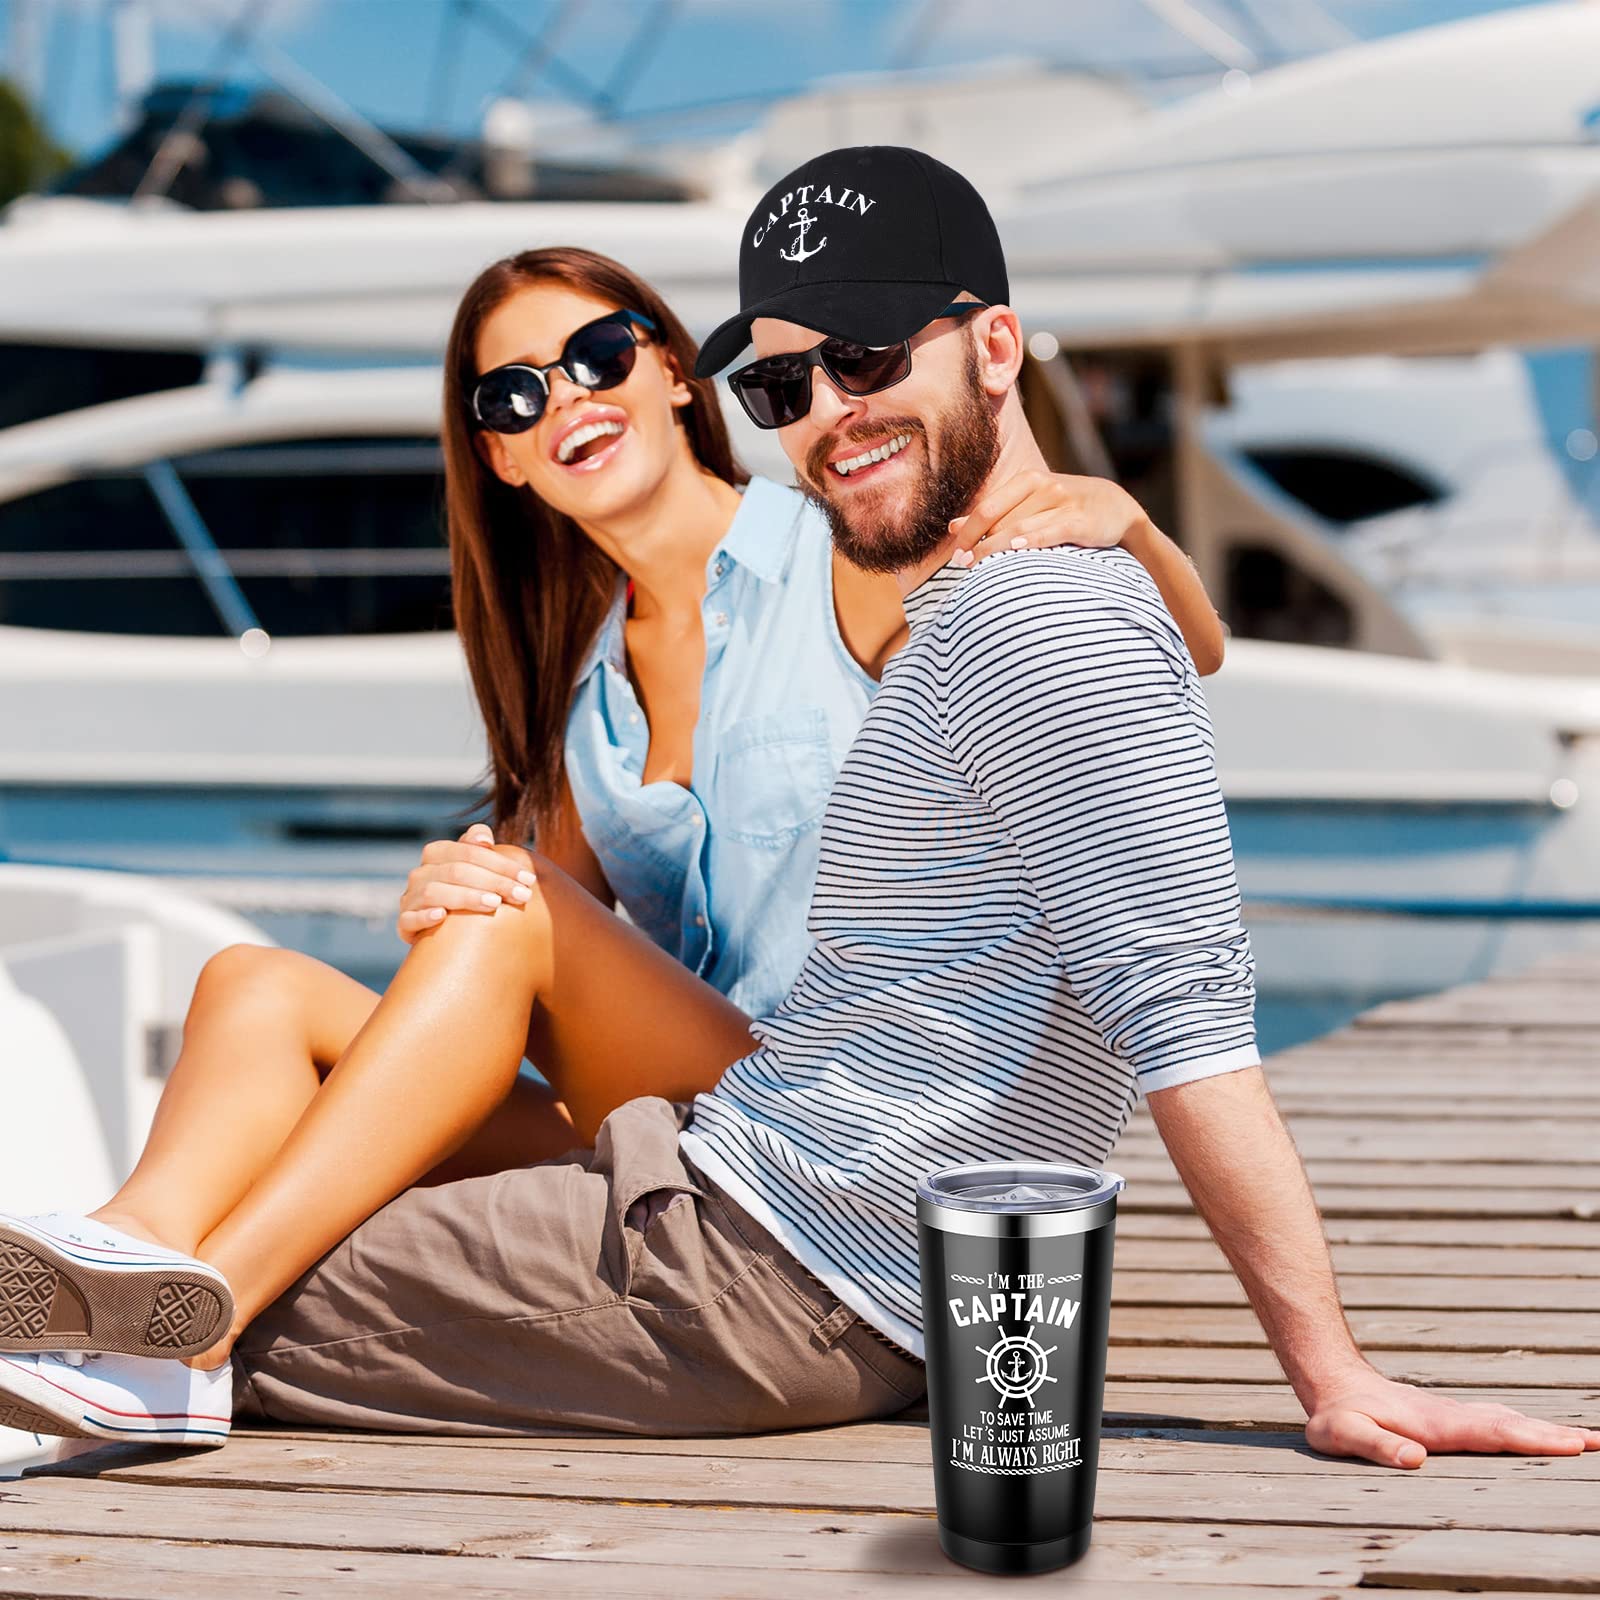 Handepo Boating Accessories Gifts for Men Boat Captain Cap I'm Captain Tumbler Boating Baseball Cap Nautical Cups Stainless Steel Coffee Mug Summer Gifts (Black)